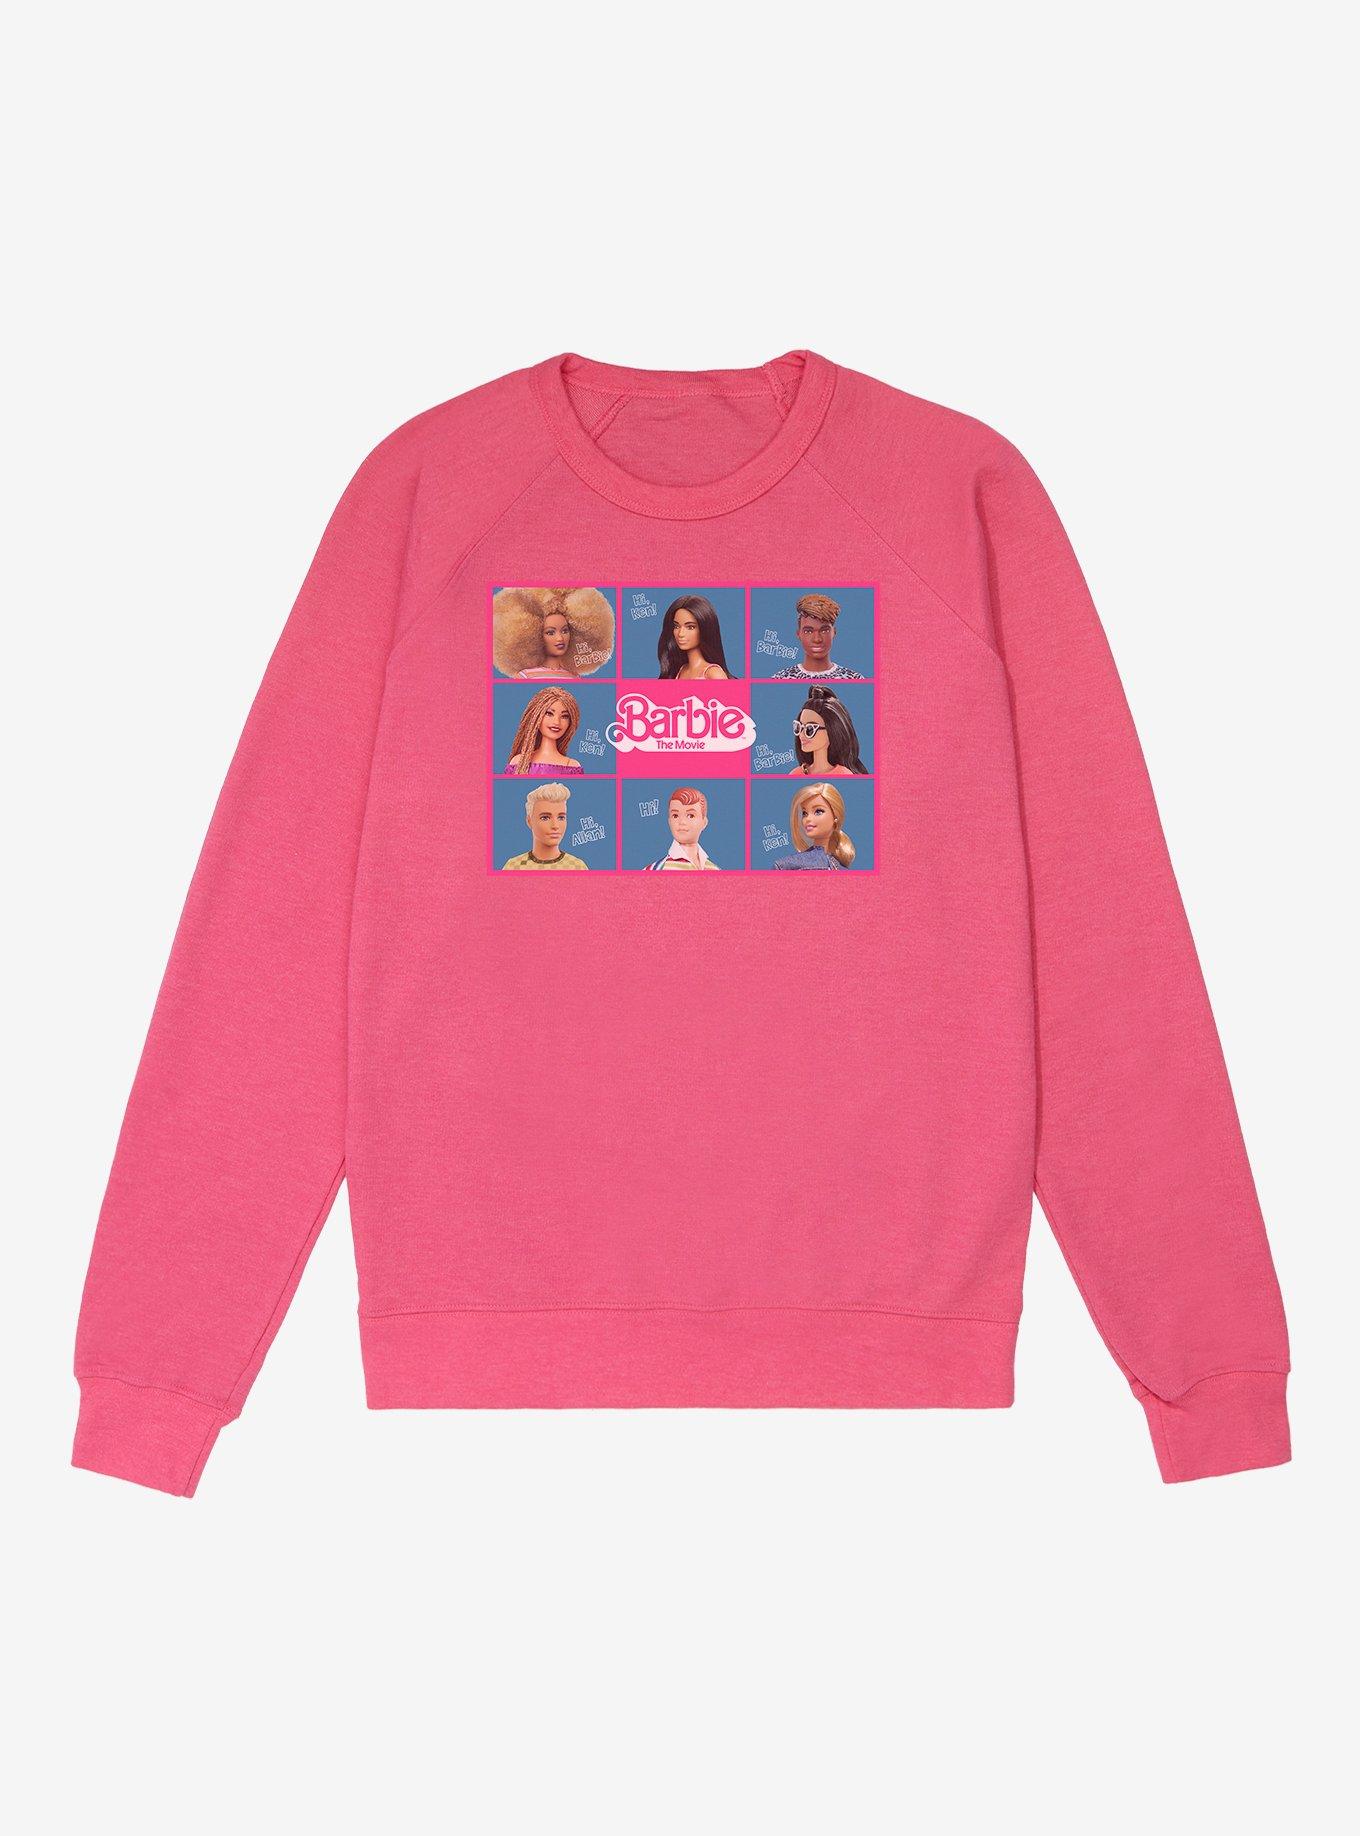 Barbie The Movie Barbie Bunch French Terry Sweatshirt, HELICONIA HEATHER, hi-res